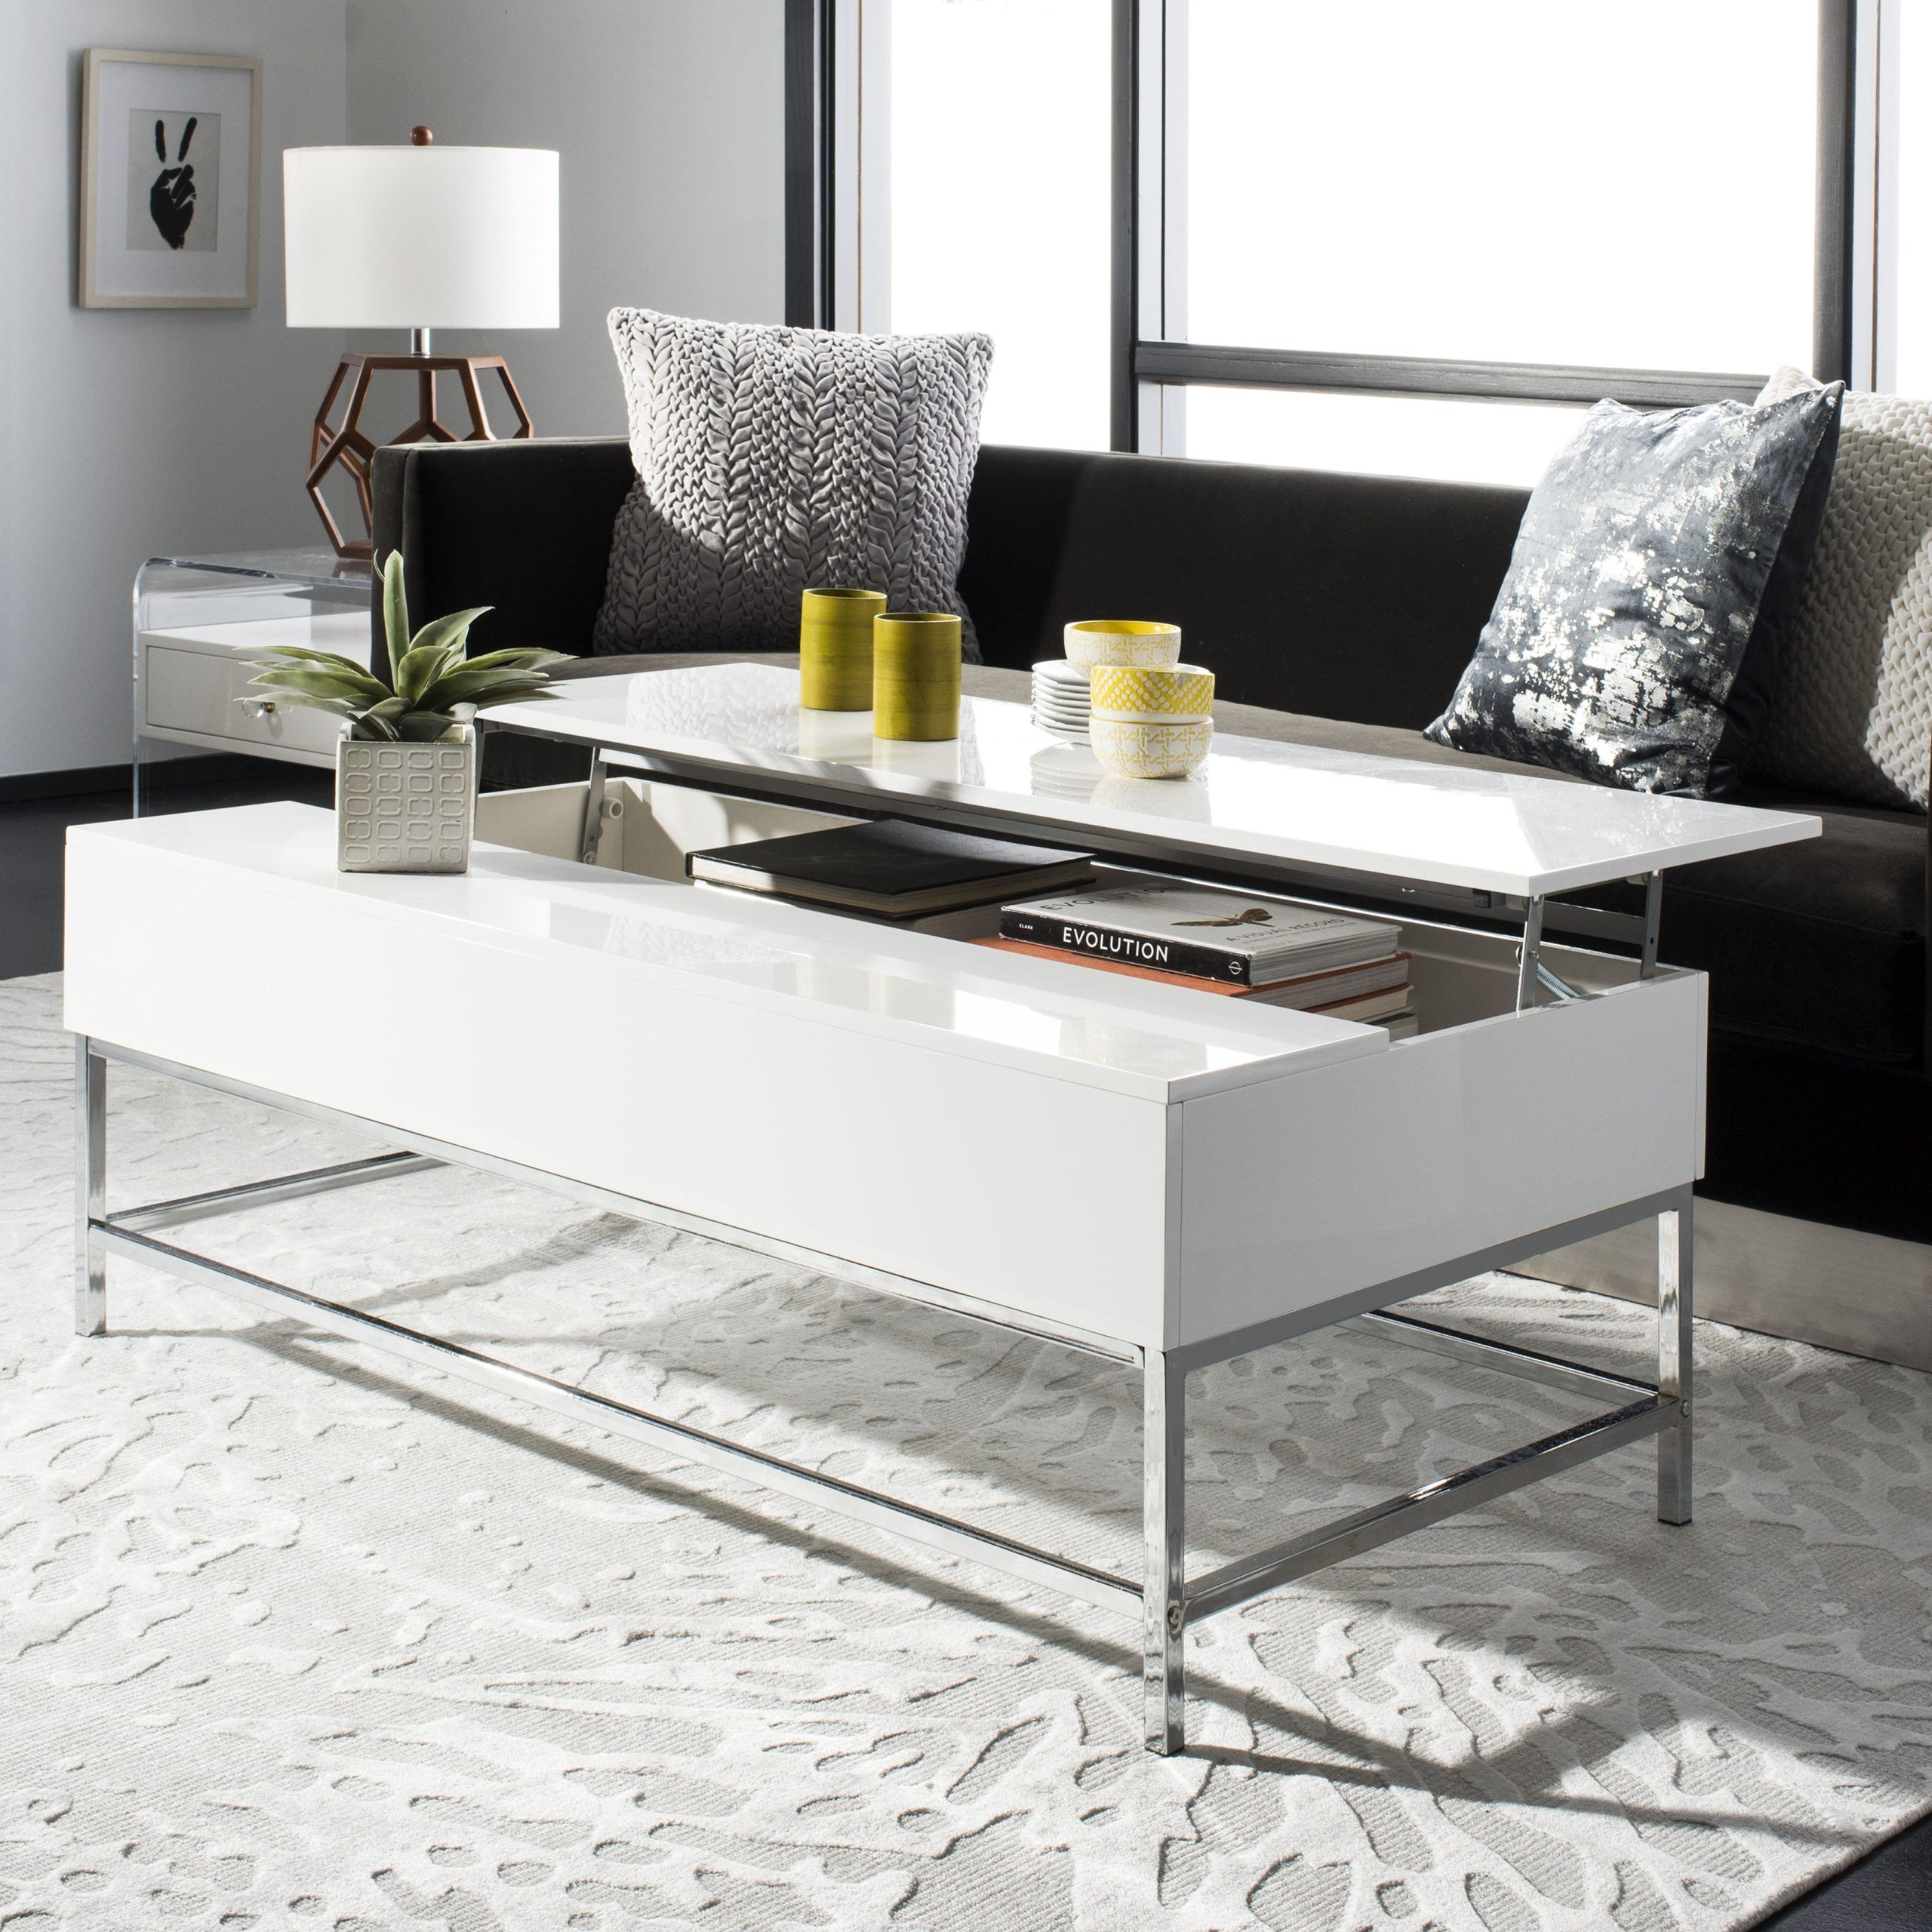 Safavieh Carolina Contemporary Lift Top Coffee Table, White Lacquer Regarding High Gloss Lift Top Coffee Tables (View 2 of 21)